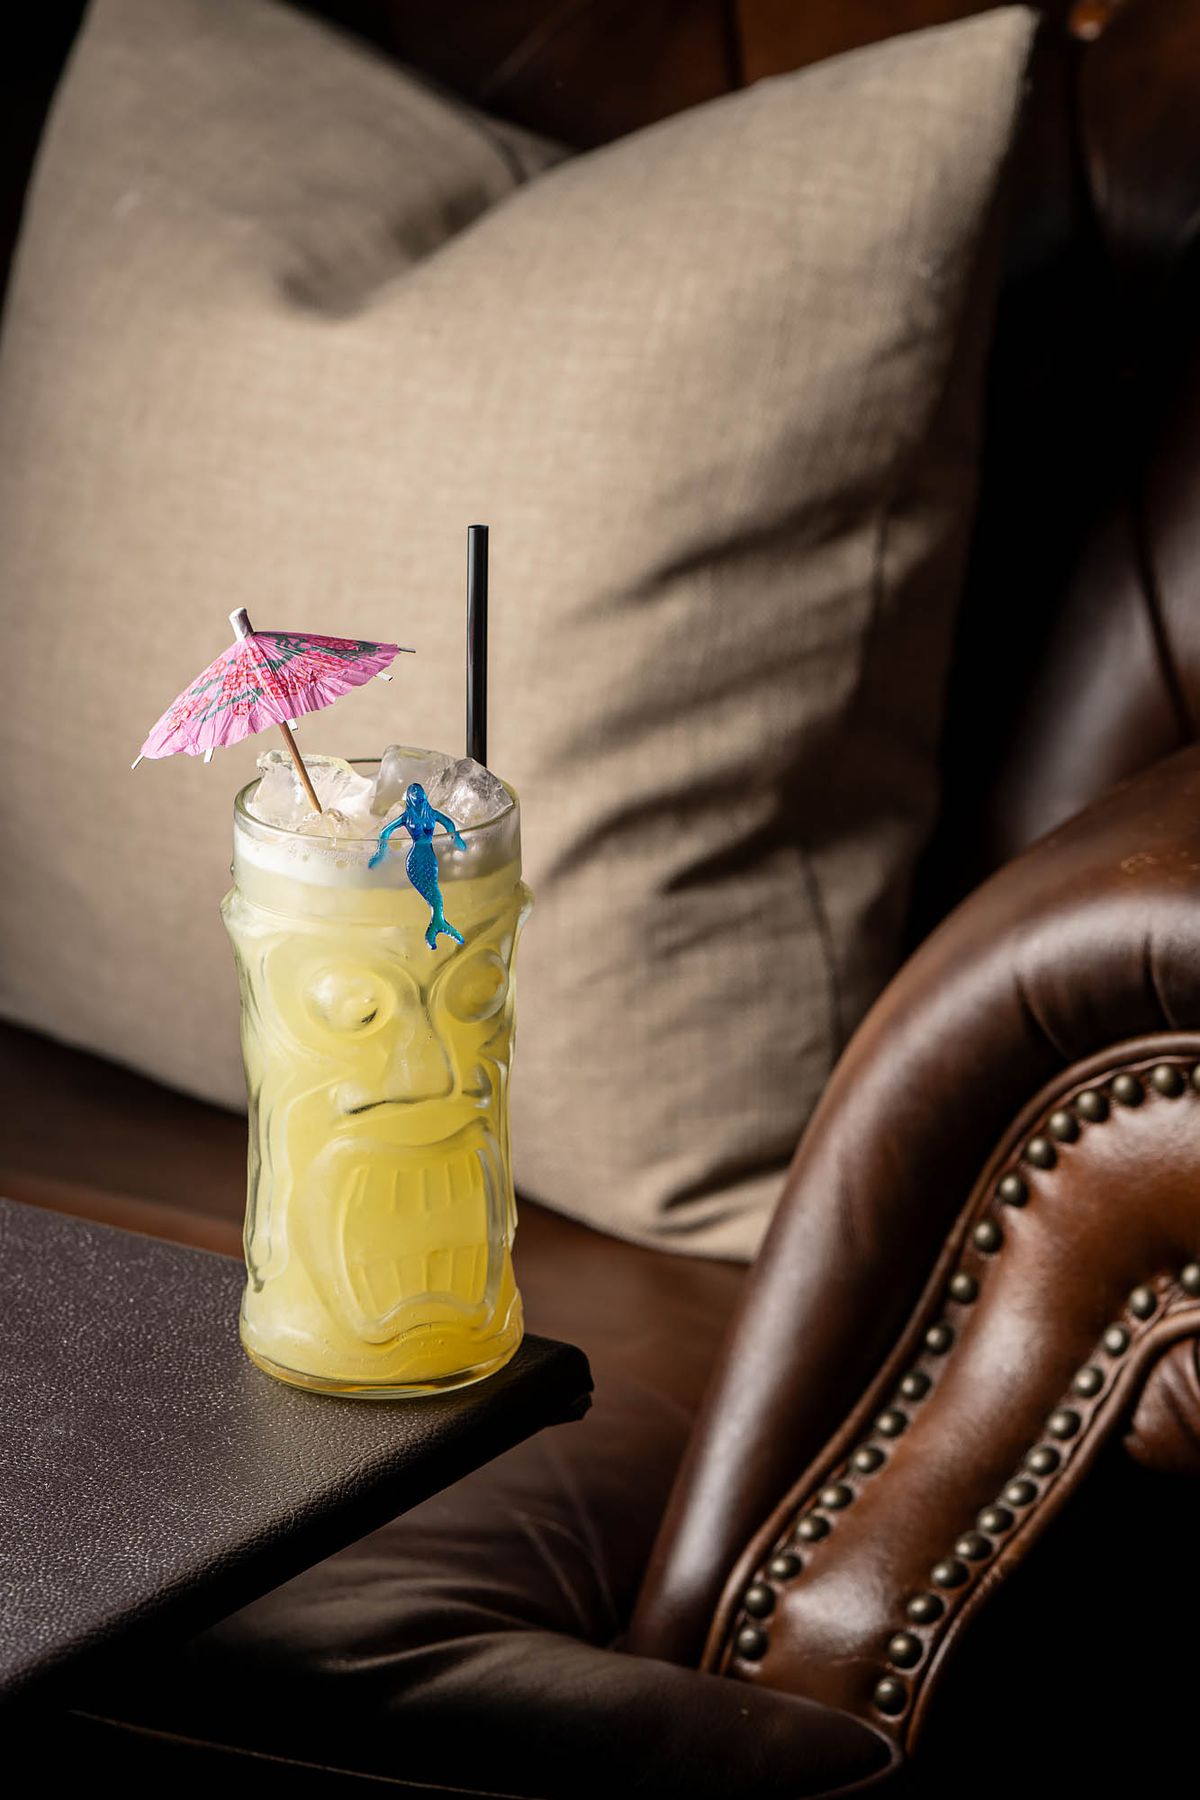 A vibrant yellow tiki drink with a blue mermaid and pink umbrella at the Rendition Room.